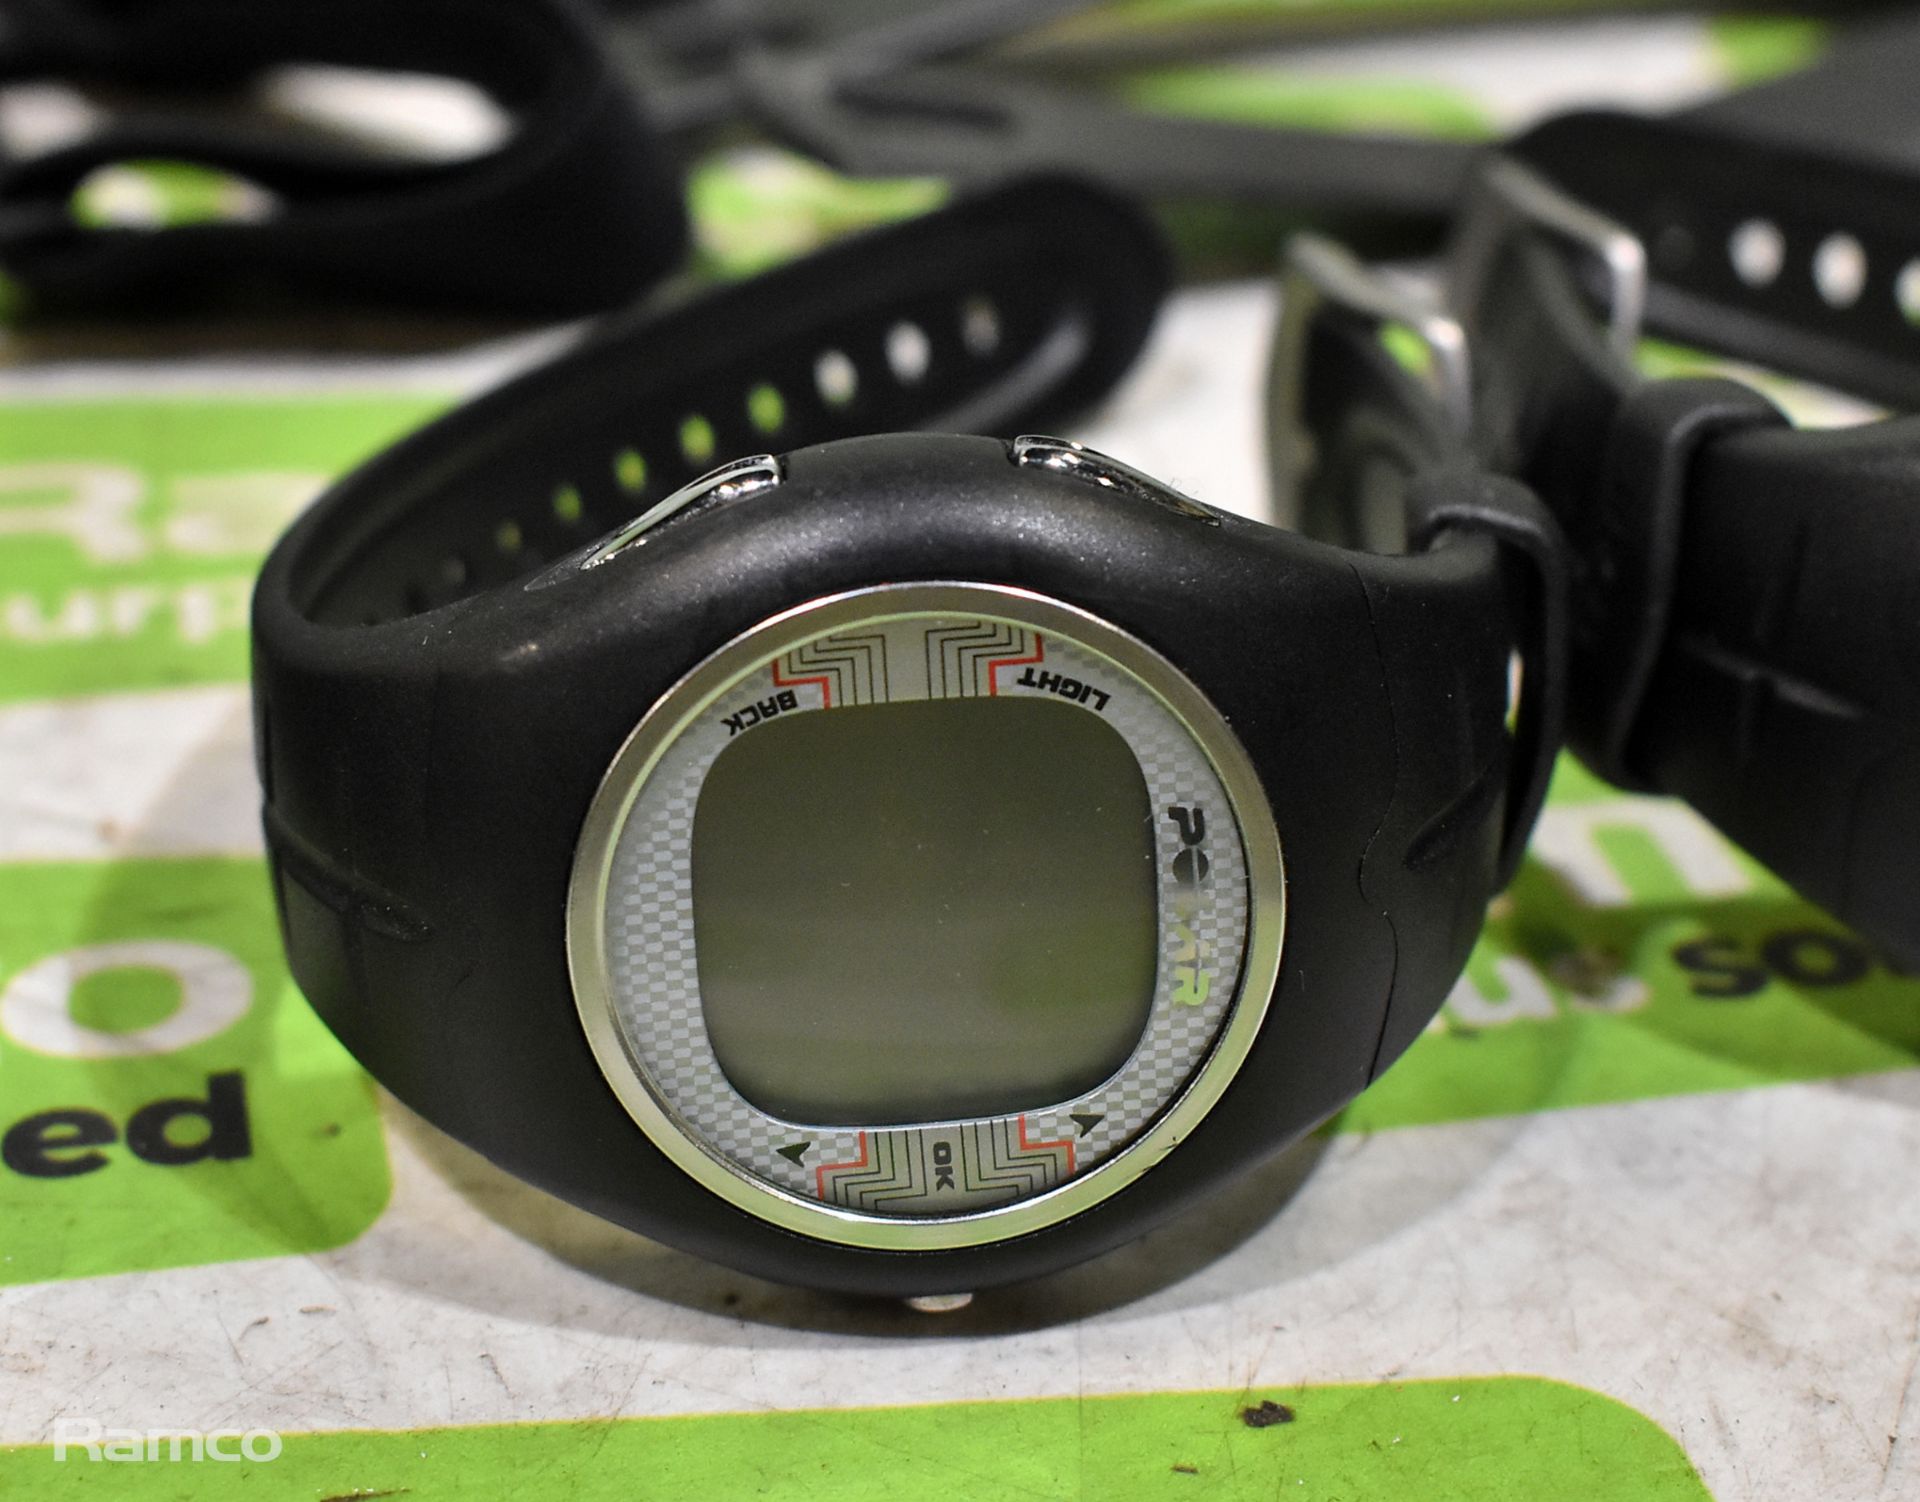 4x Polar F6 heart rate monitor watch and chest monitors - Image 4 of 5